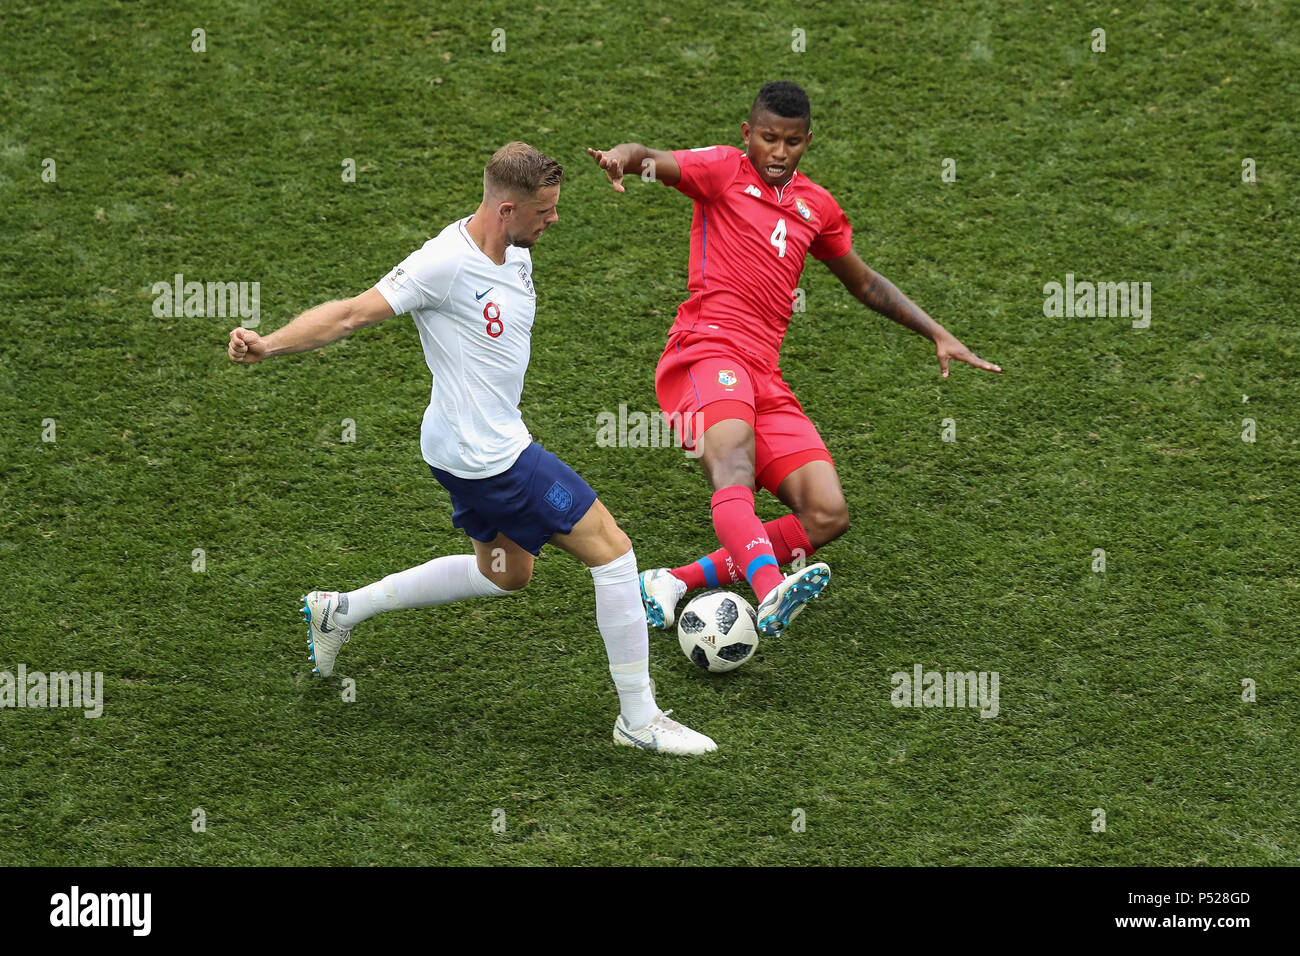 Nizhny Novgorod, Russia. 24th June, 2018. Jordan Henderson of England and Fidel Escobar of Panama during the 2018 FIFA World Cup Group G match between England and Panama at Nizhny Novgorod Stadium on June 24th 2018 in Nizhny Novgorod, Russia. (Photo by Daniel Chesterton/phcimages.com) Credit: PHC Images/Alamy Live News Stock Photo